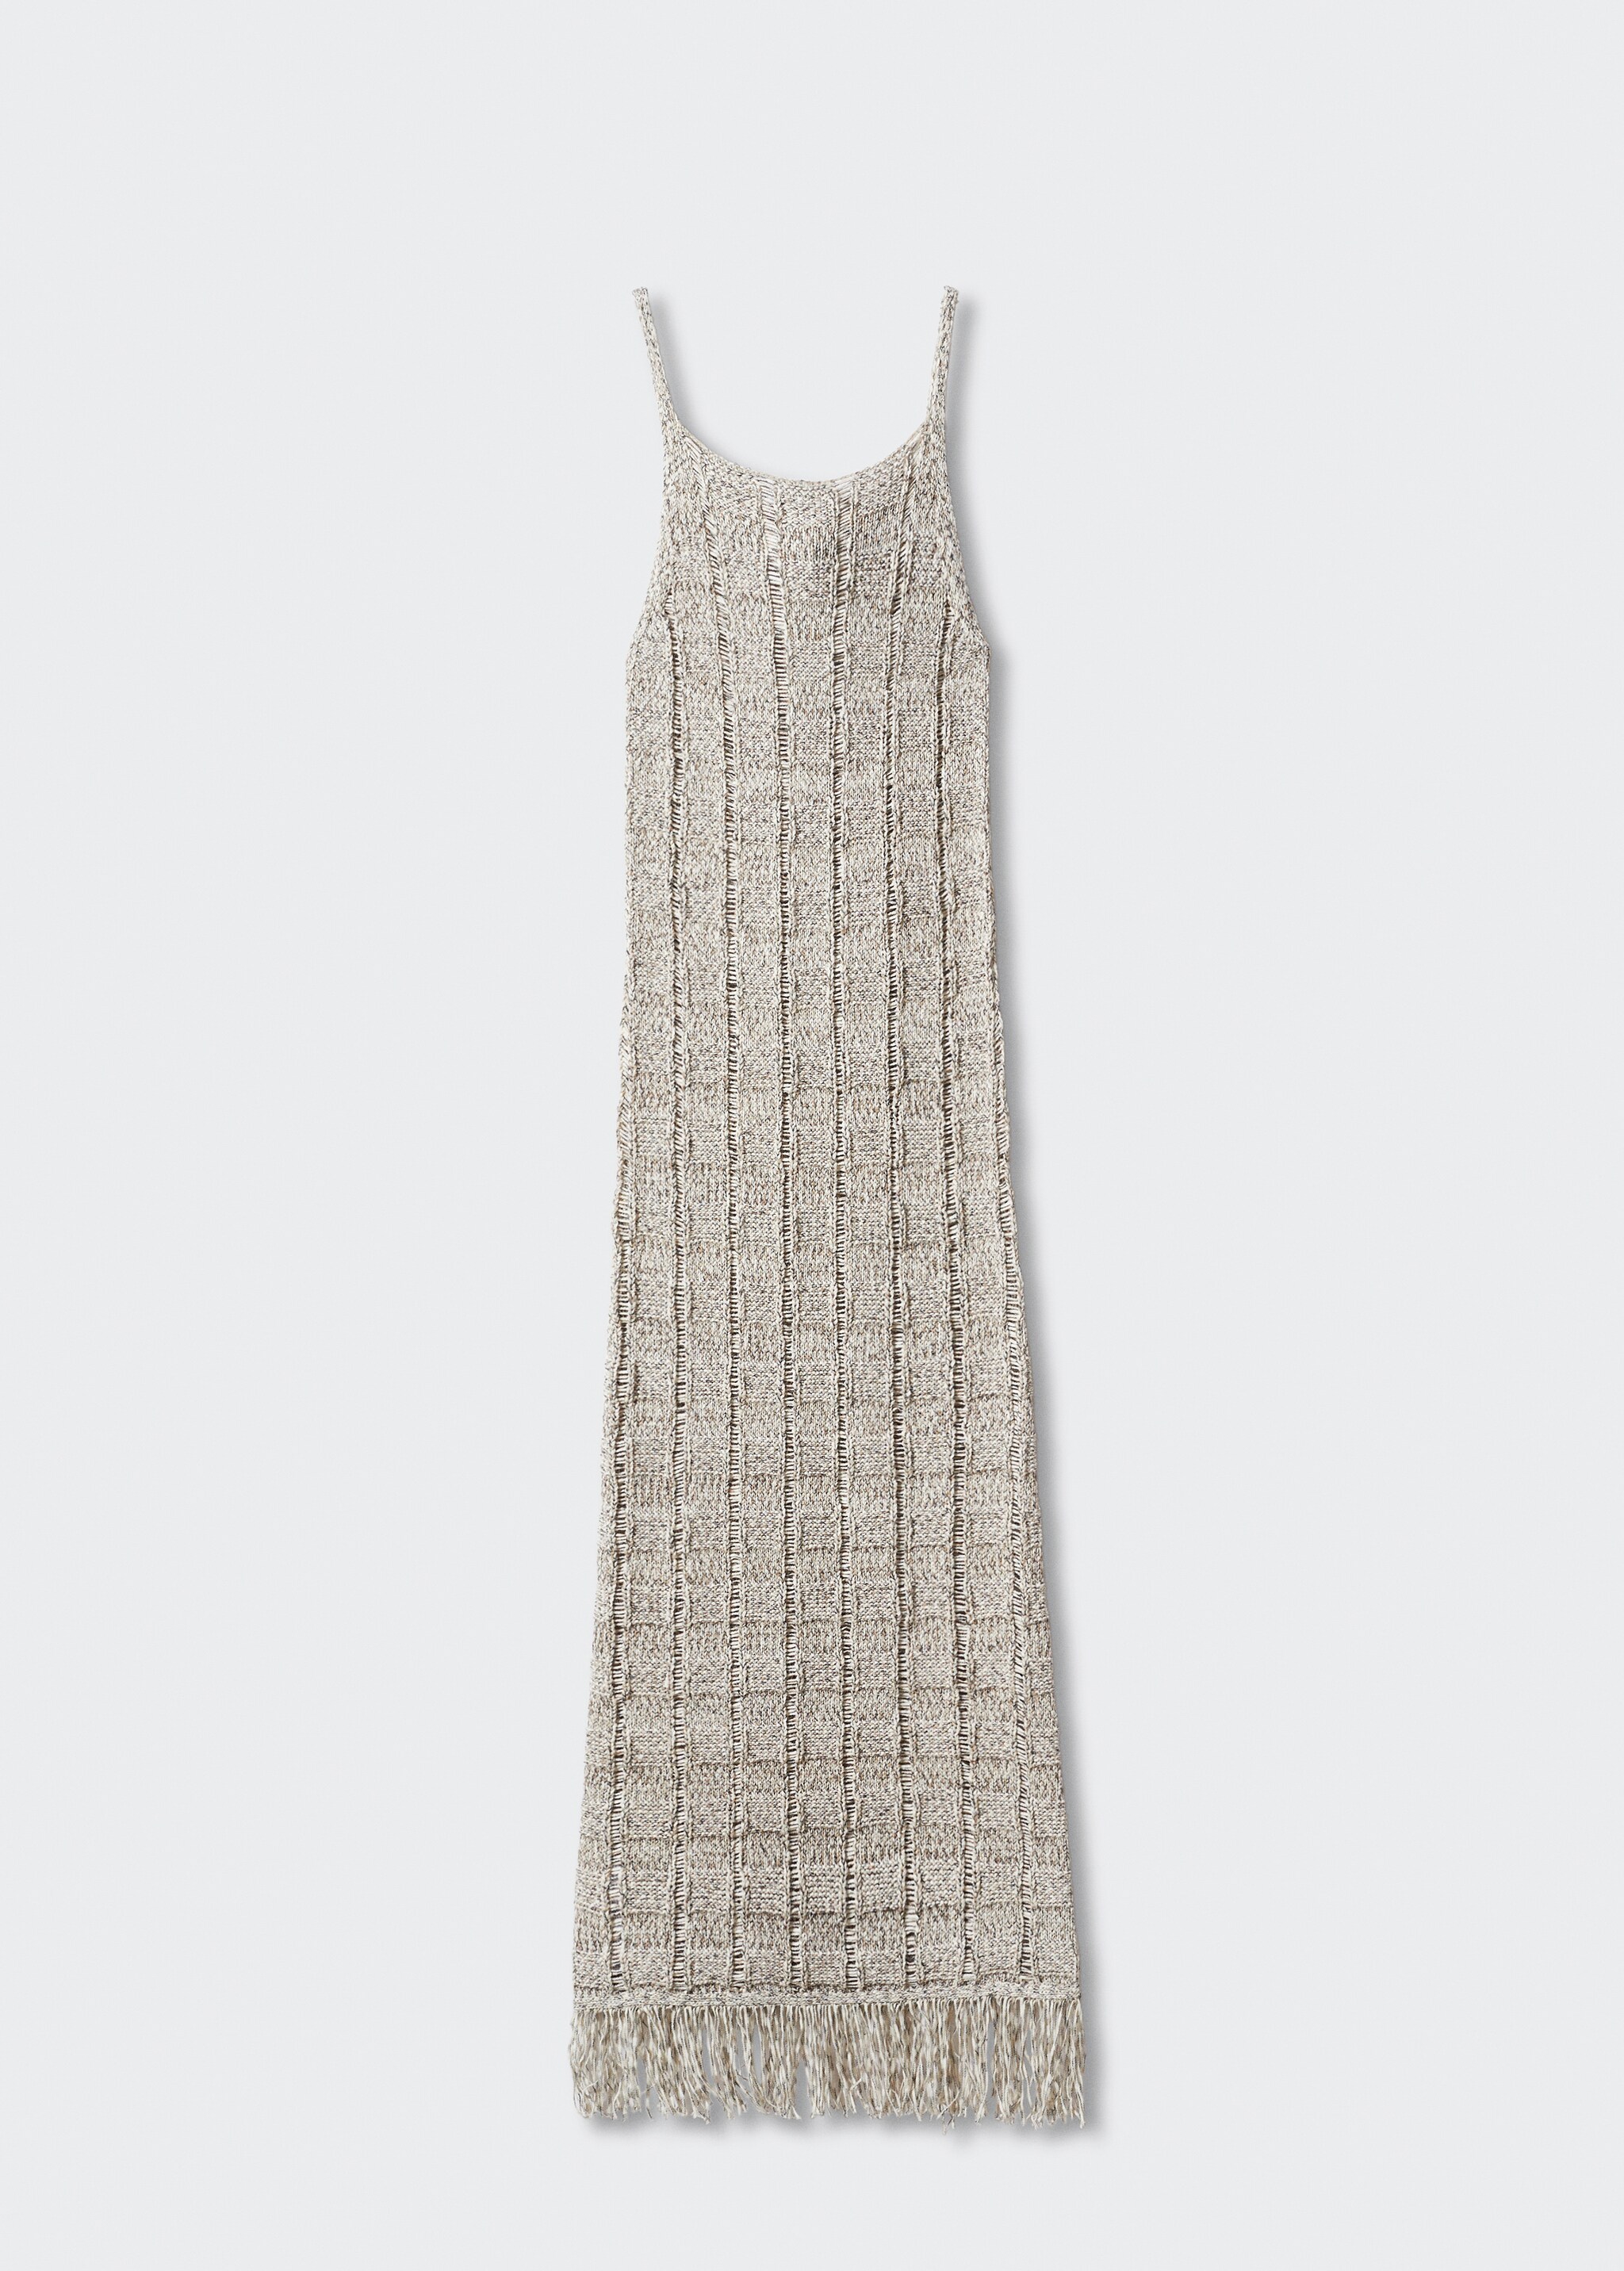 Knitted dress with fringe detail - Article without model